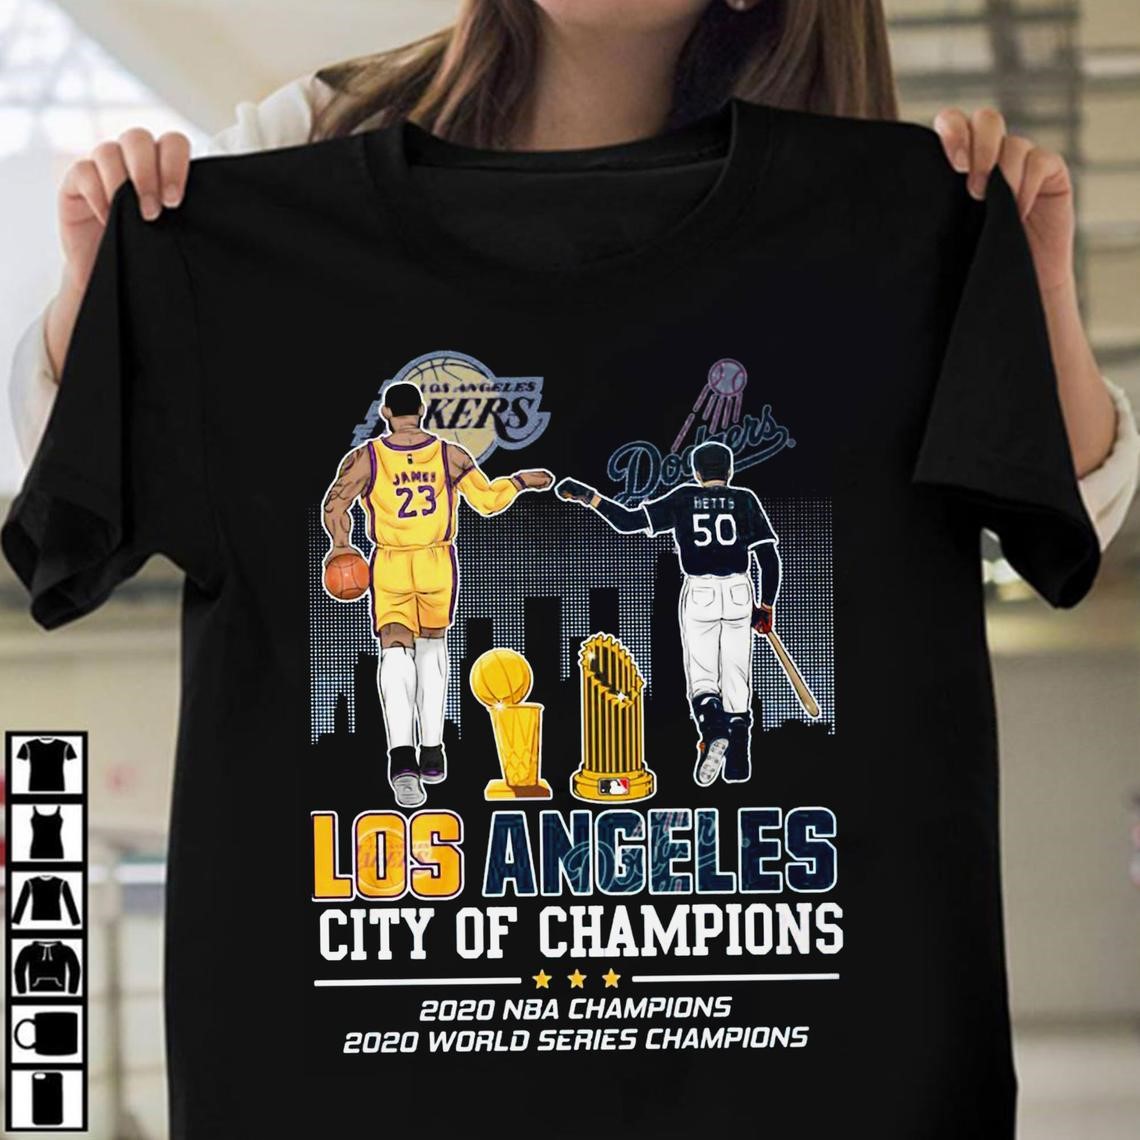 Lakers James And Dodgers Betts Los Angeles City Of Champions 2020 Nba Champions 2020 World Series Champions Shirt